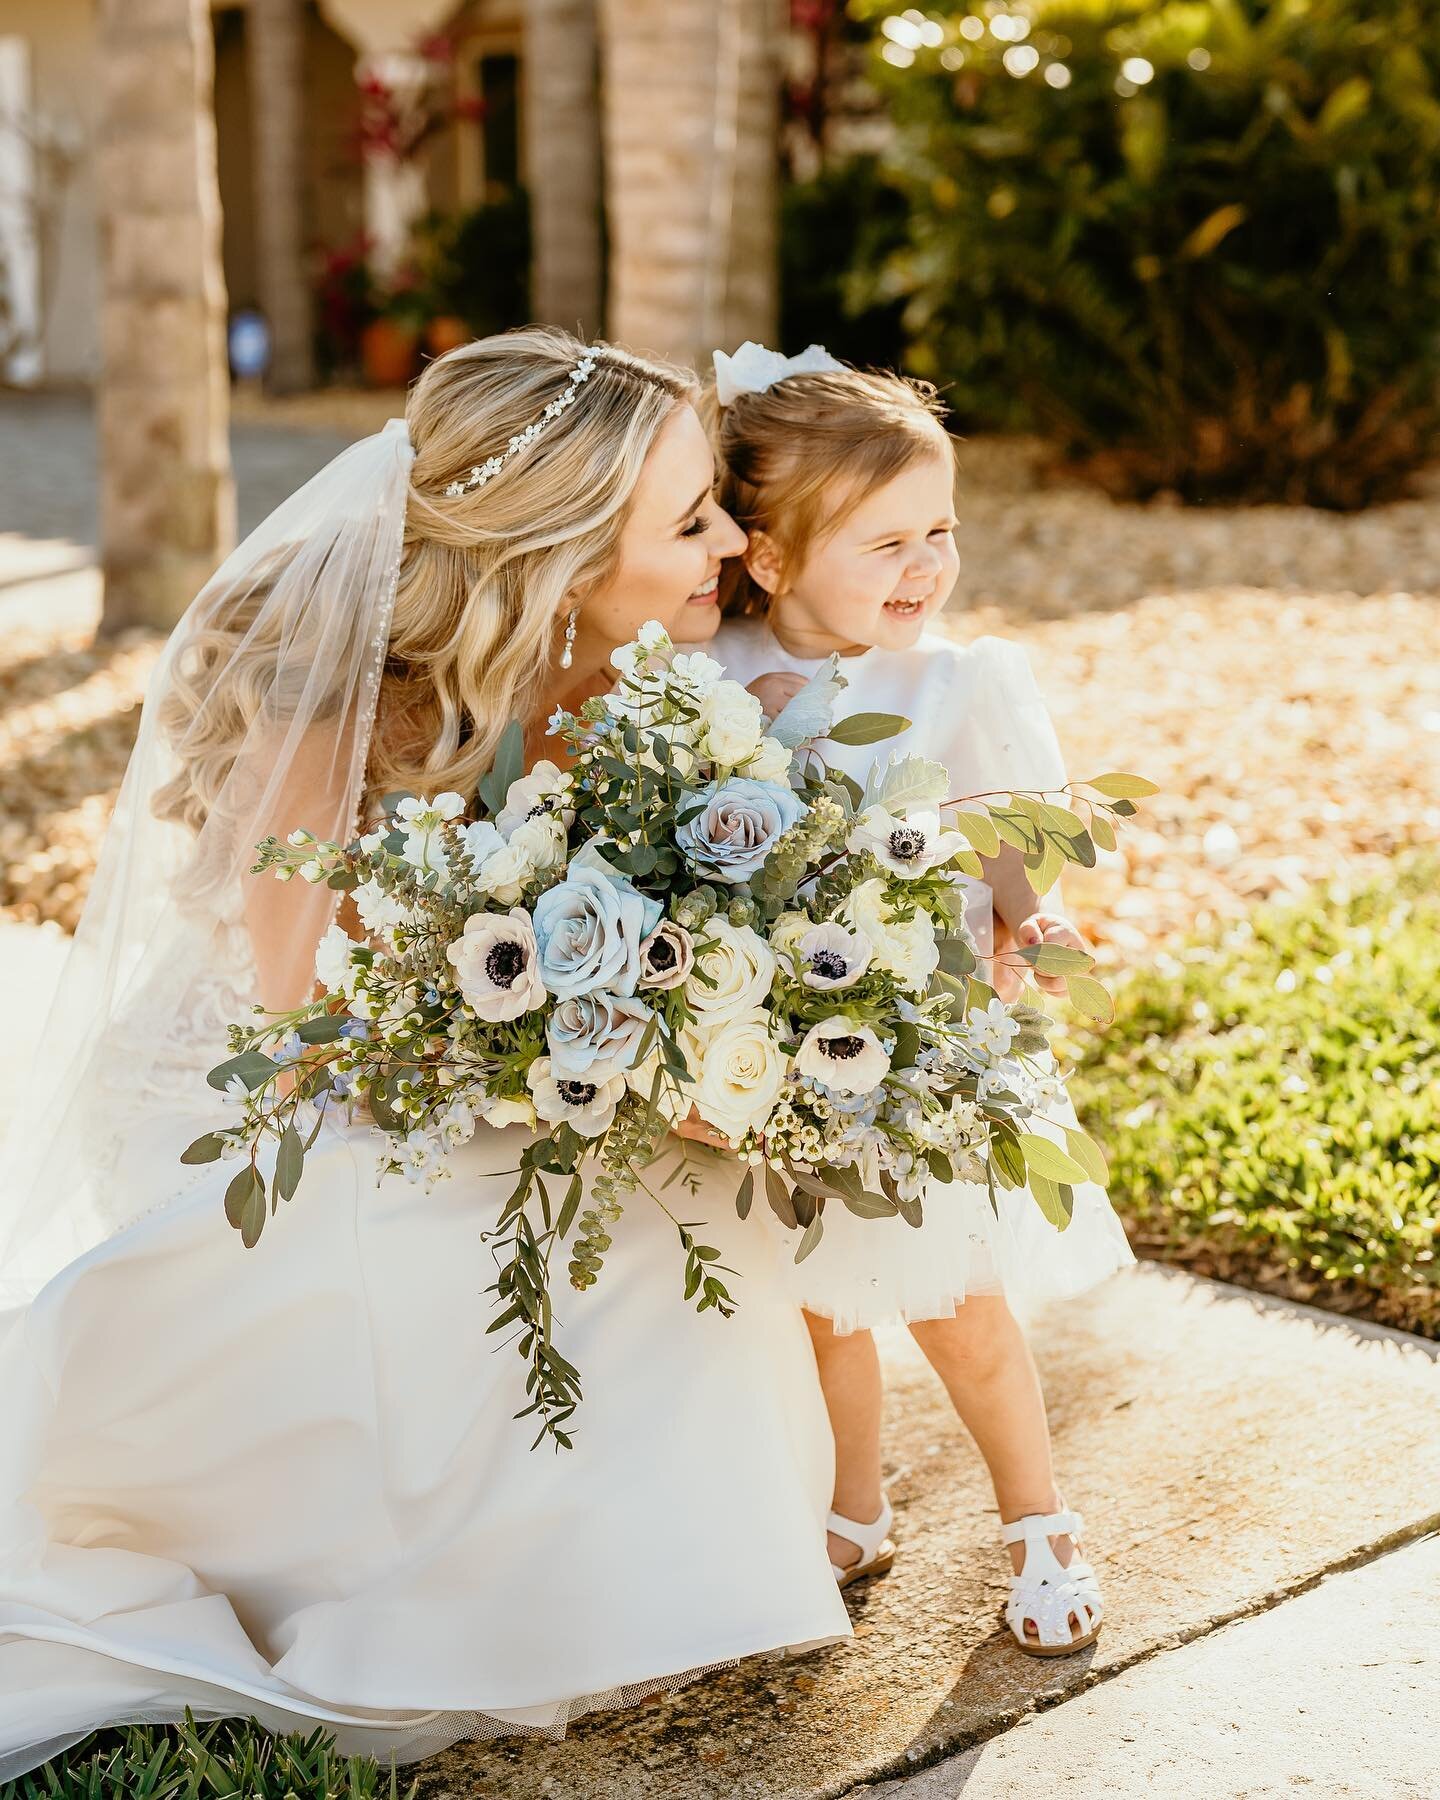 Mama&rsquo;s make the world go round ✨ Happy Mother&rsquo;s Day from EABD!

#mothersday #wedding #weddingday #motherofthebride #bride #weddingplanner #tampabay #floridawedding #happymothersday